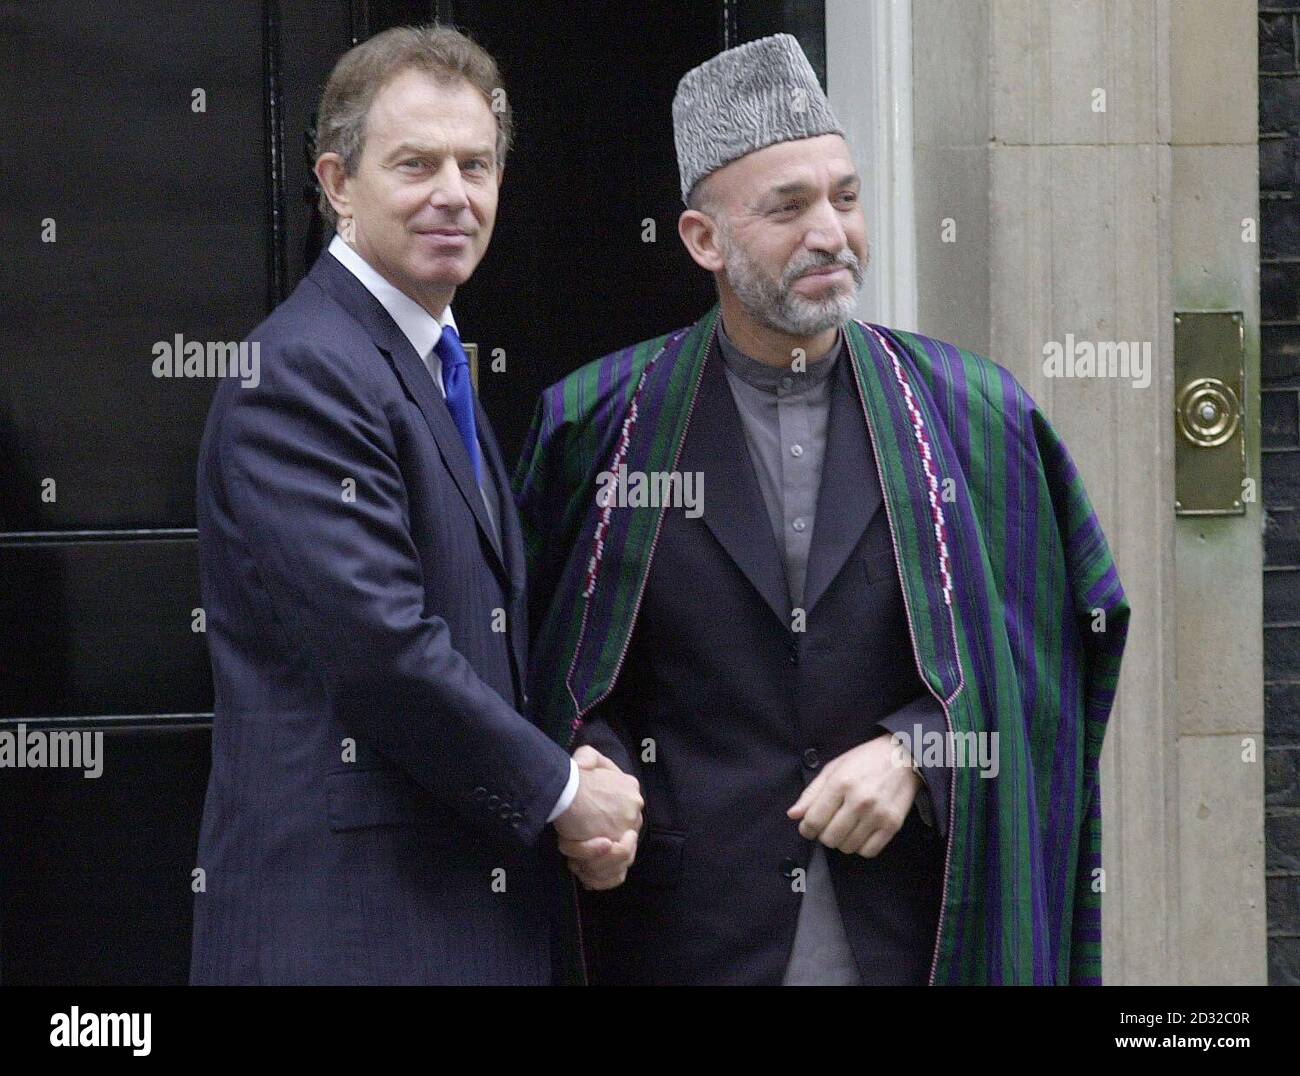 British Prime Minister Tony Blair (left) meets Afghanistan's Interim Leader Hamid Karzai in Downing Street, London during a visit to Britain. Speaking in the Cabinet Room at 10 Downing Street Hamid Karzai thanked Britain and its allies for giving his country back to its people.  * .... and liberating it from the occupying force of the Taliban and its terrorist allies. He is only the second foreign leader after Bill Clinton to be given the privilege of addressing ministers there. Stock Photo